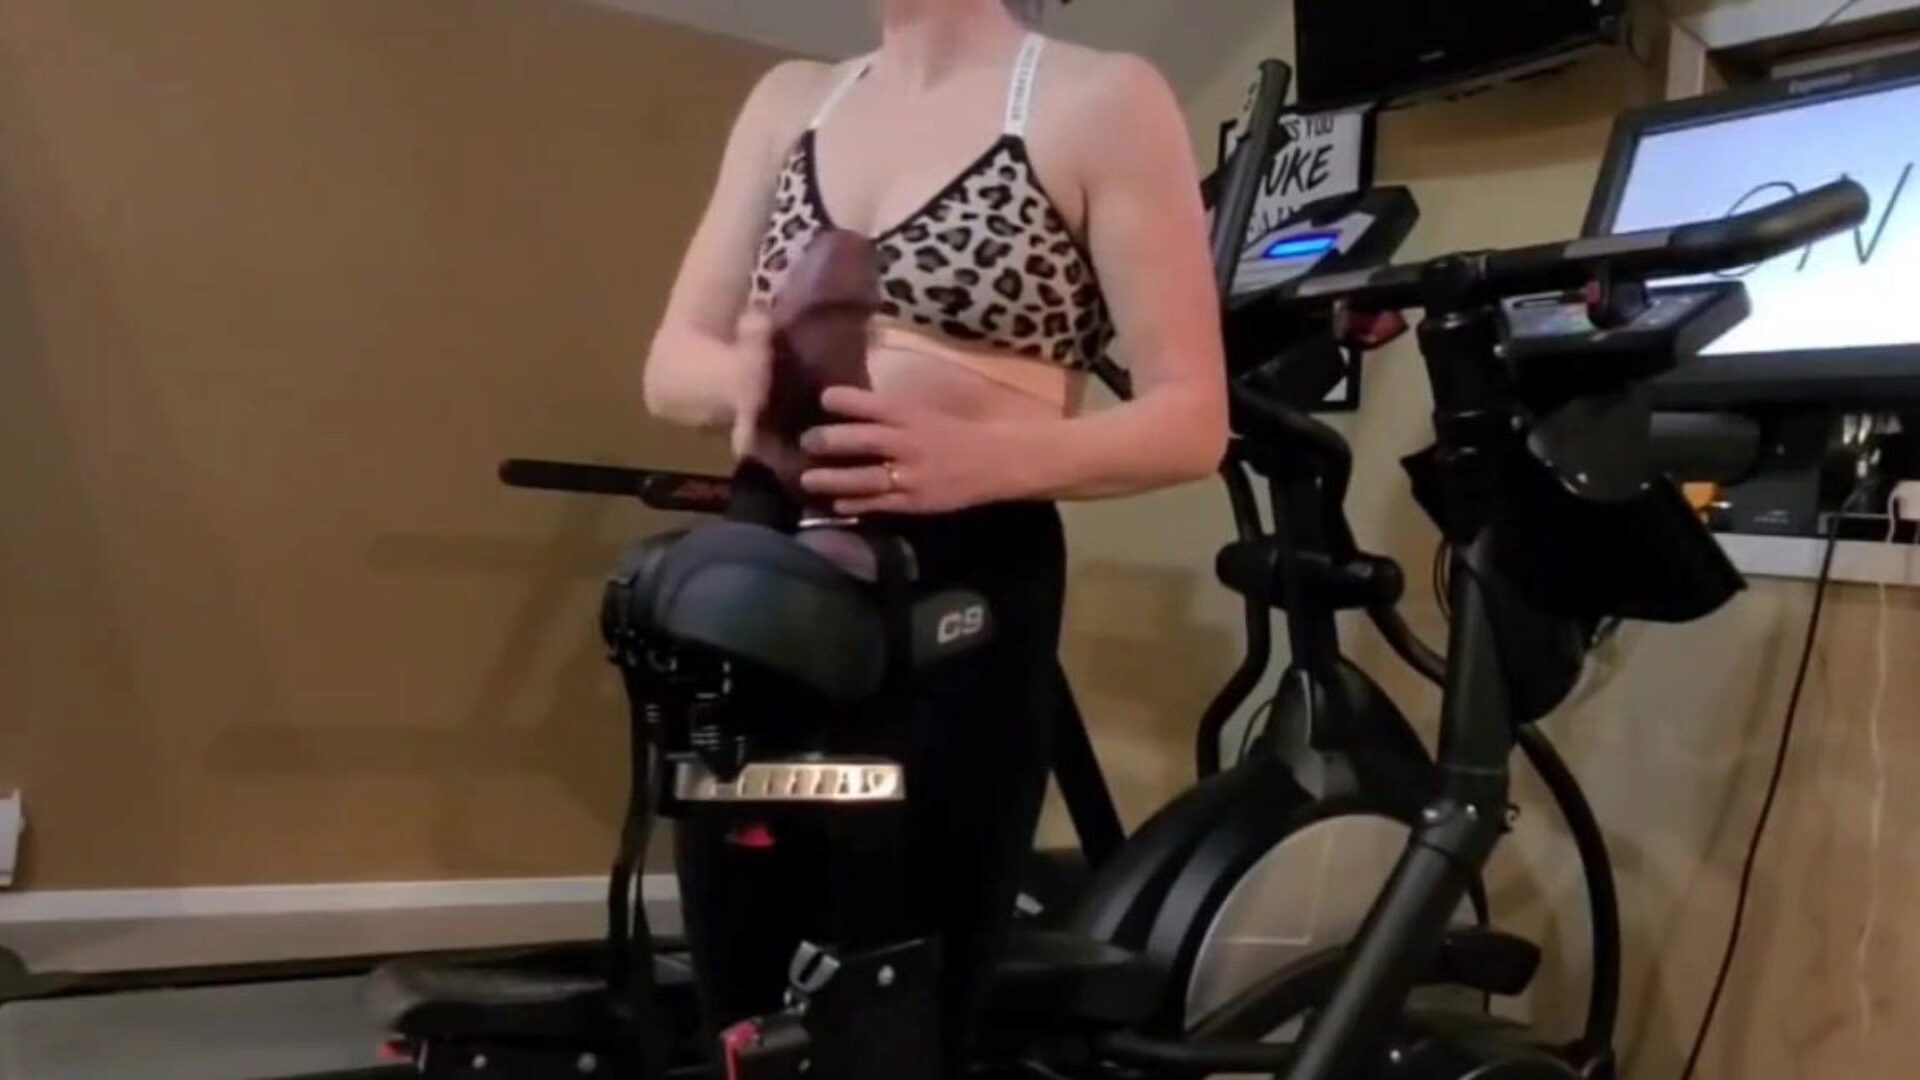 Miss A keeping Joey fit with the Hilt 95 from topped playthings Miss A doesn't like obese sissy's so she made Joey ride the fresh Hilt 95 from topped playthings on our workout bike